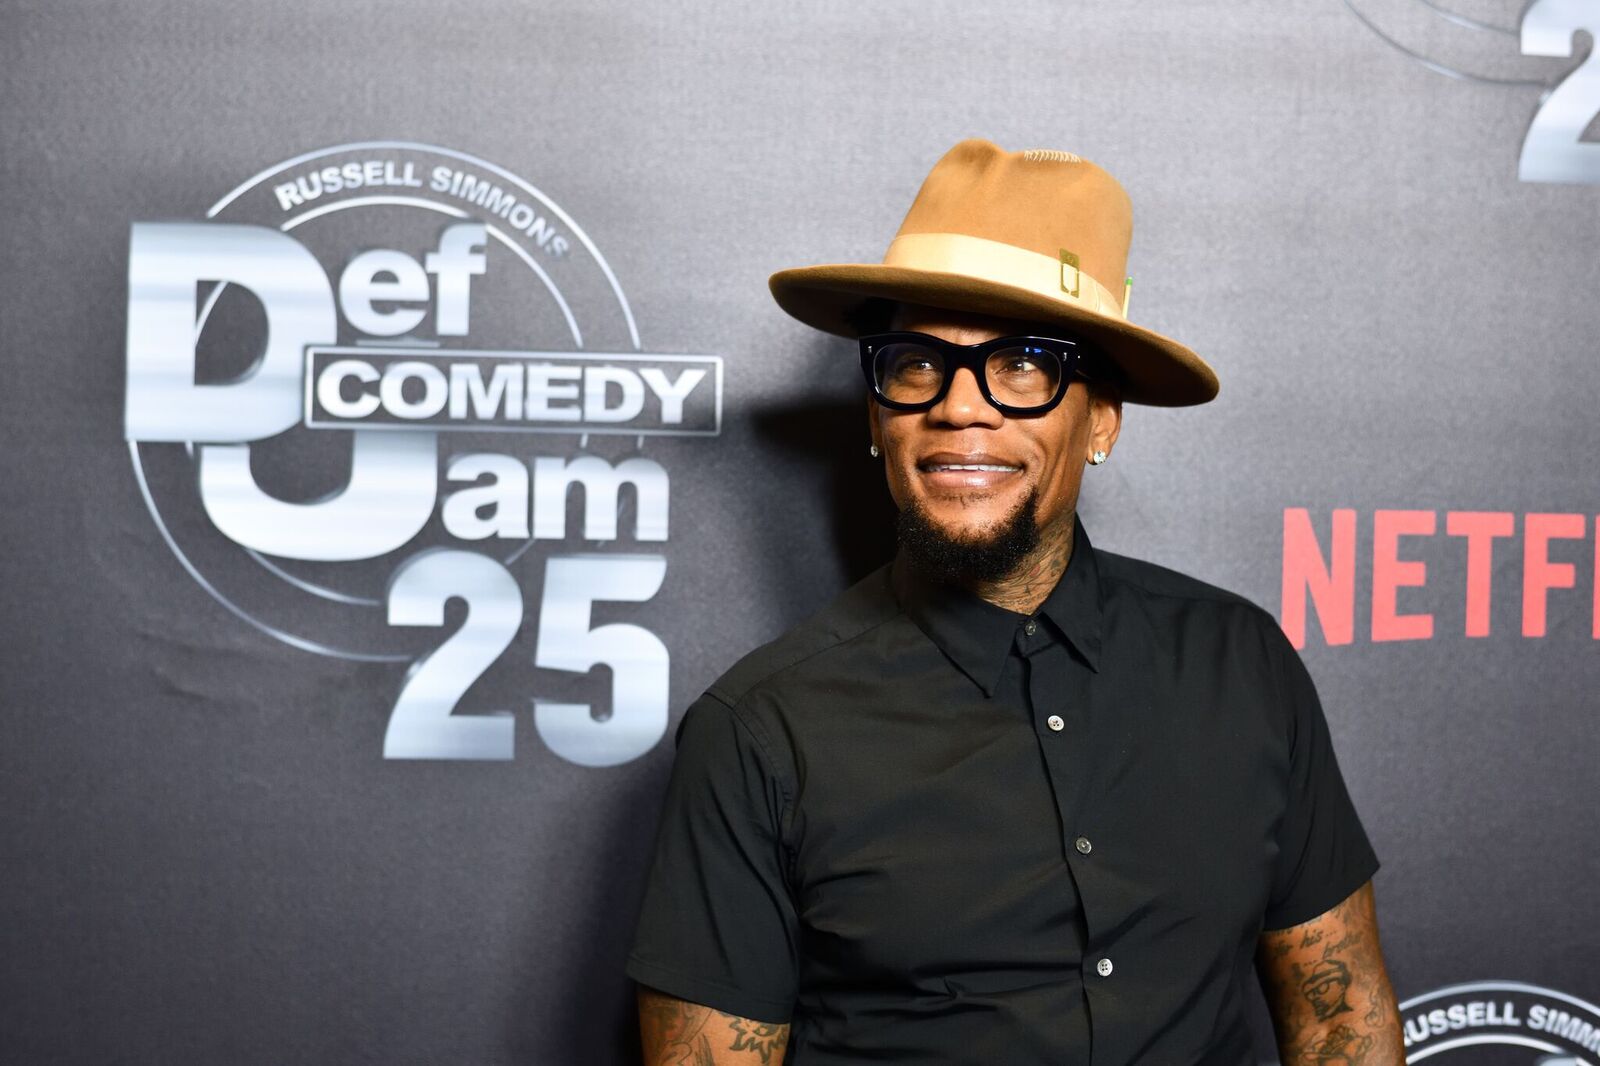 D.L. Hughley at "Def Comedy Jam 25" in Beverly Hills in 2017. | Source: Getty Images